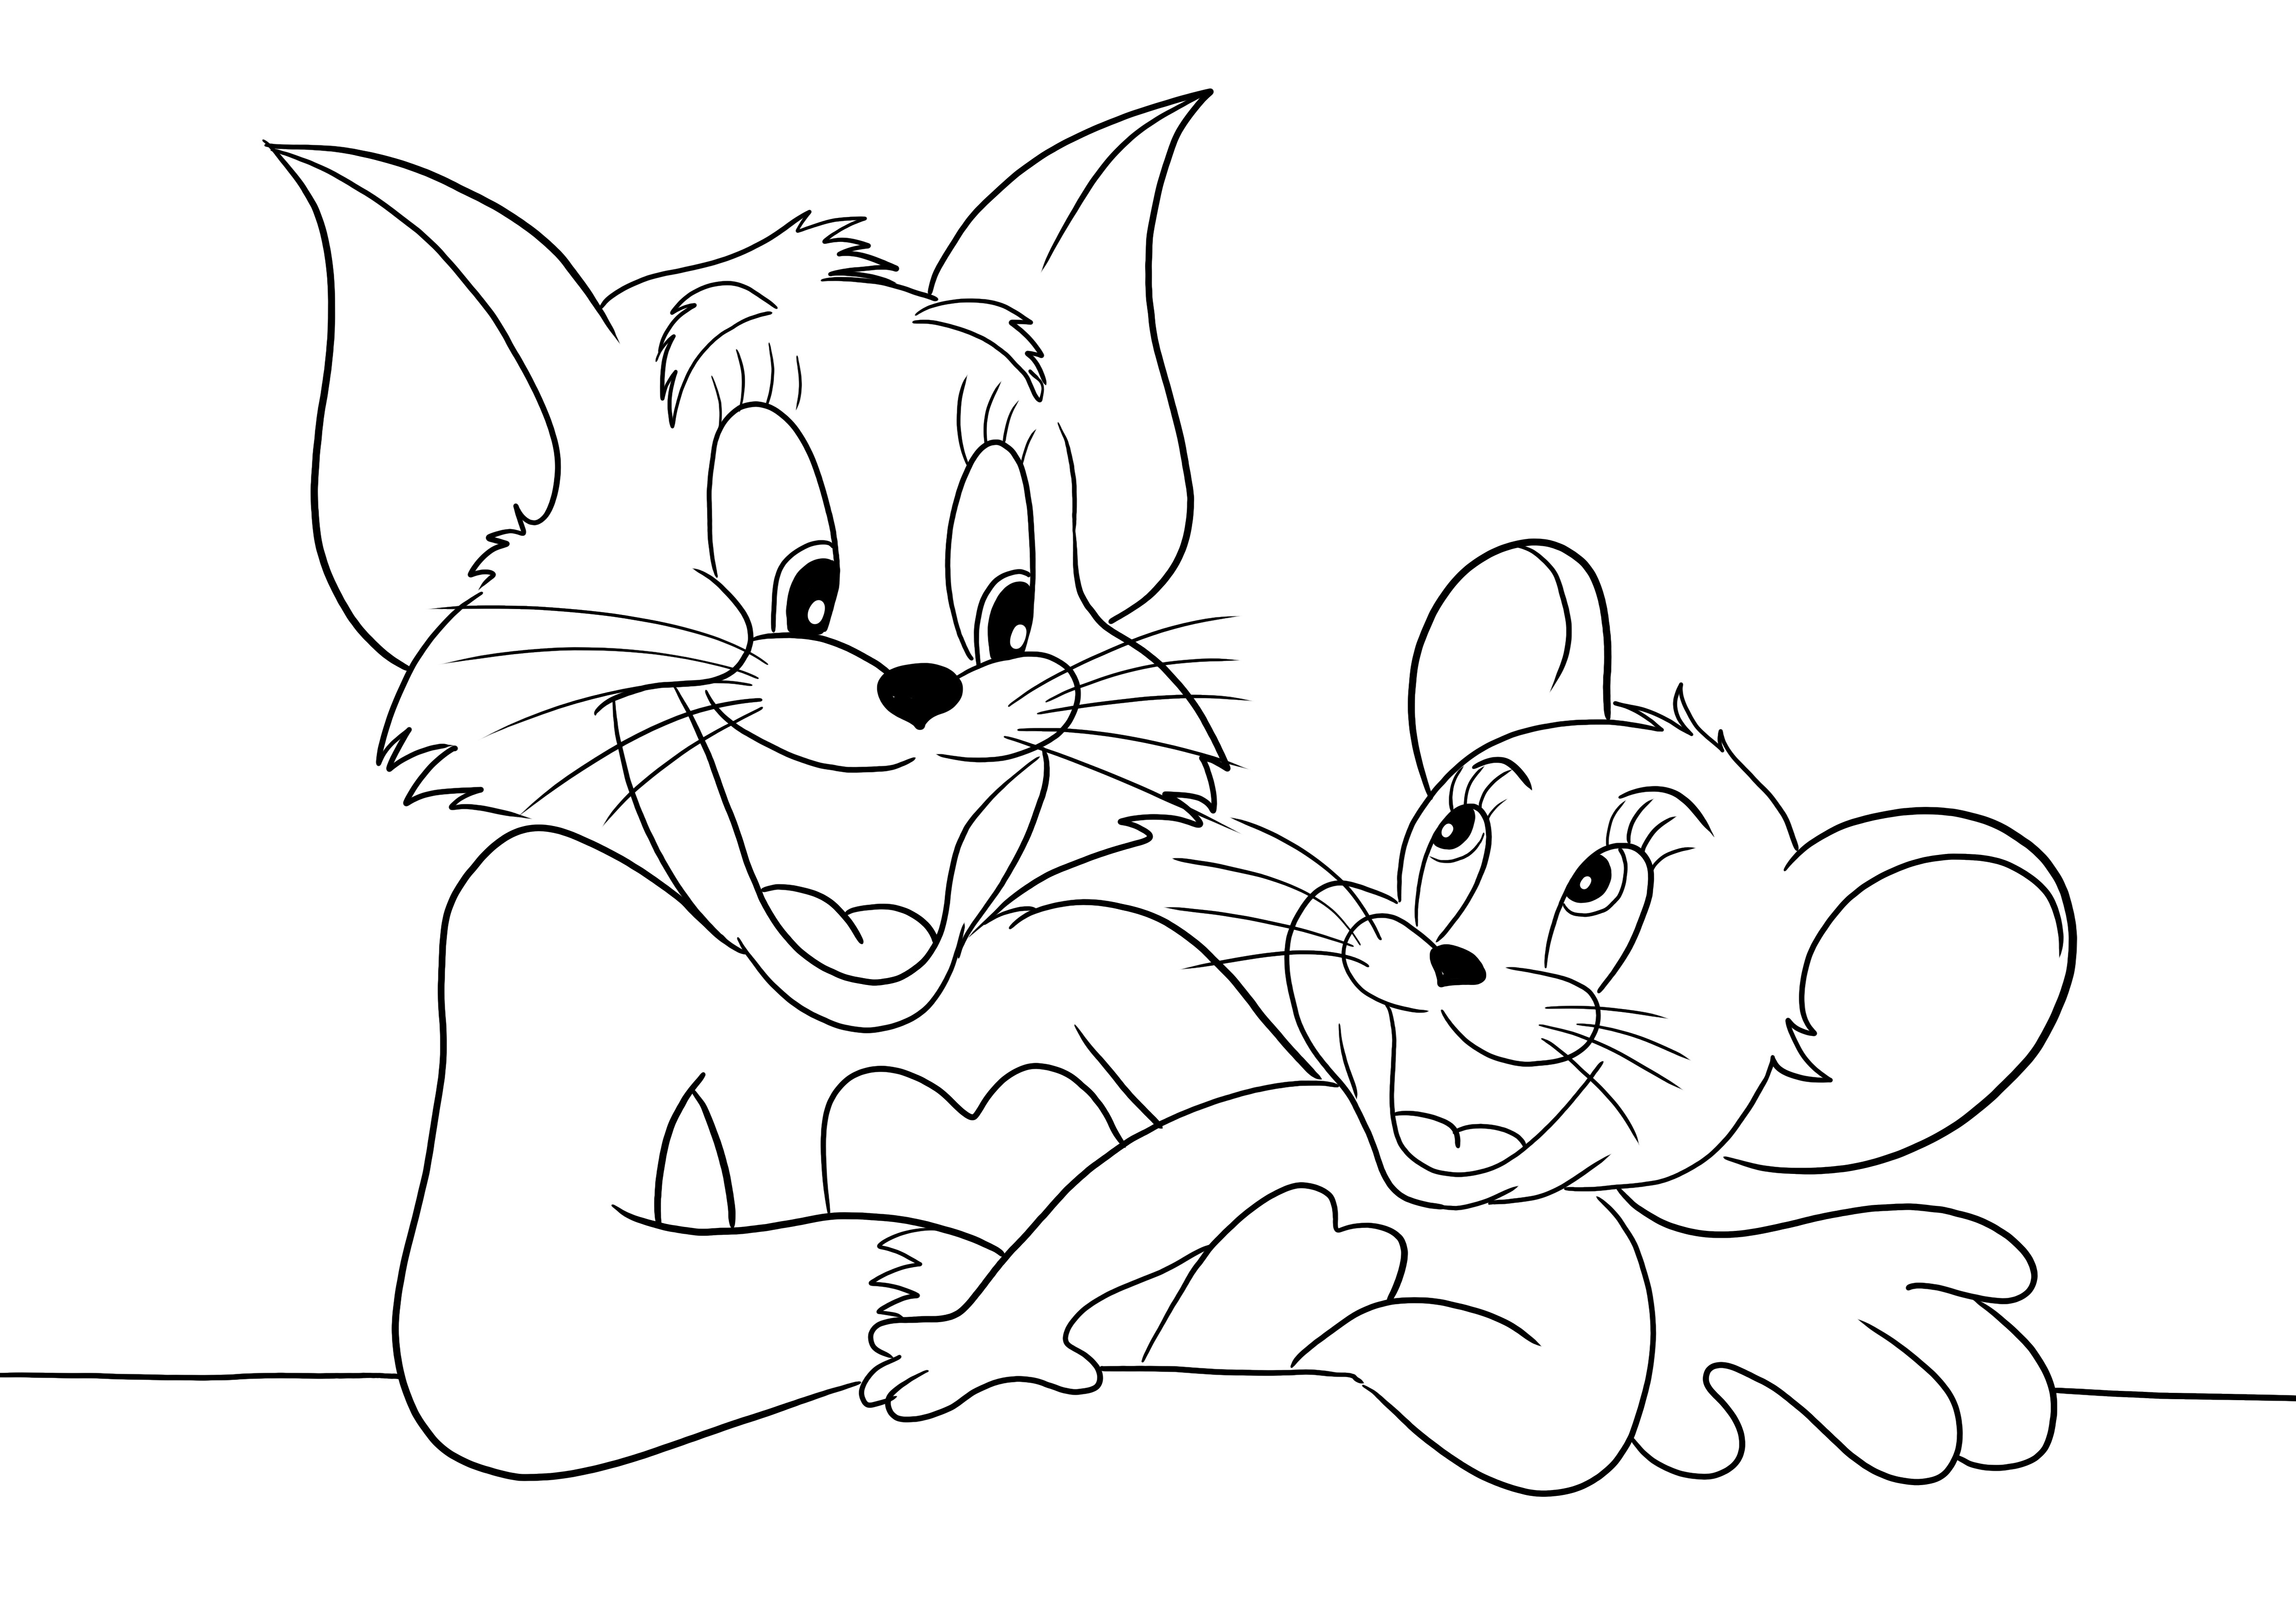 Happy Tom and Jerry free printable ready for coloring for kids